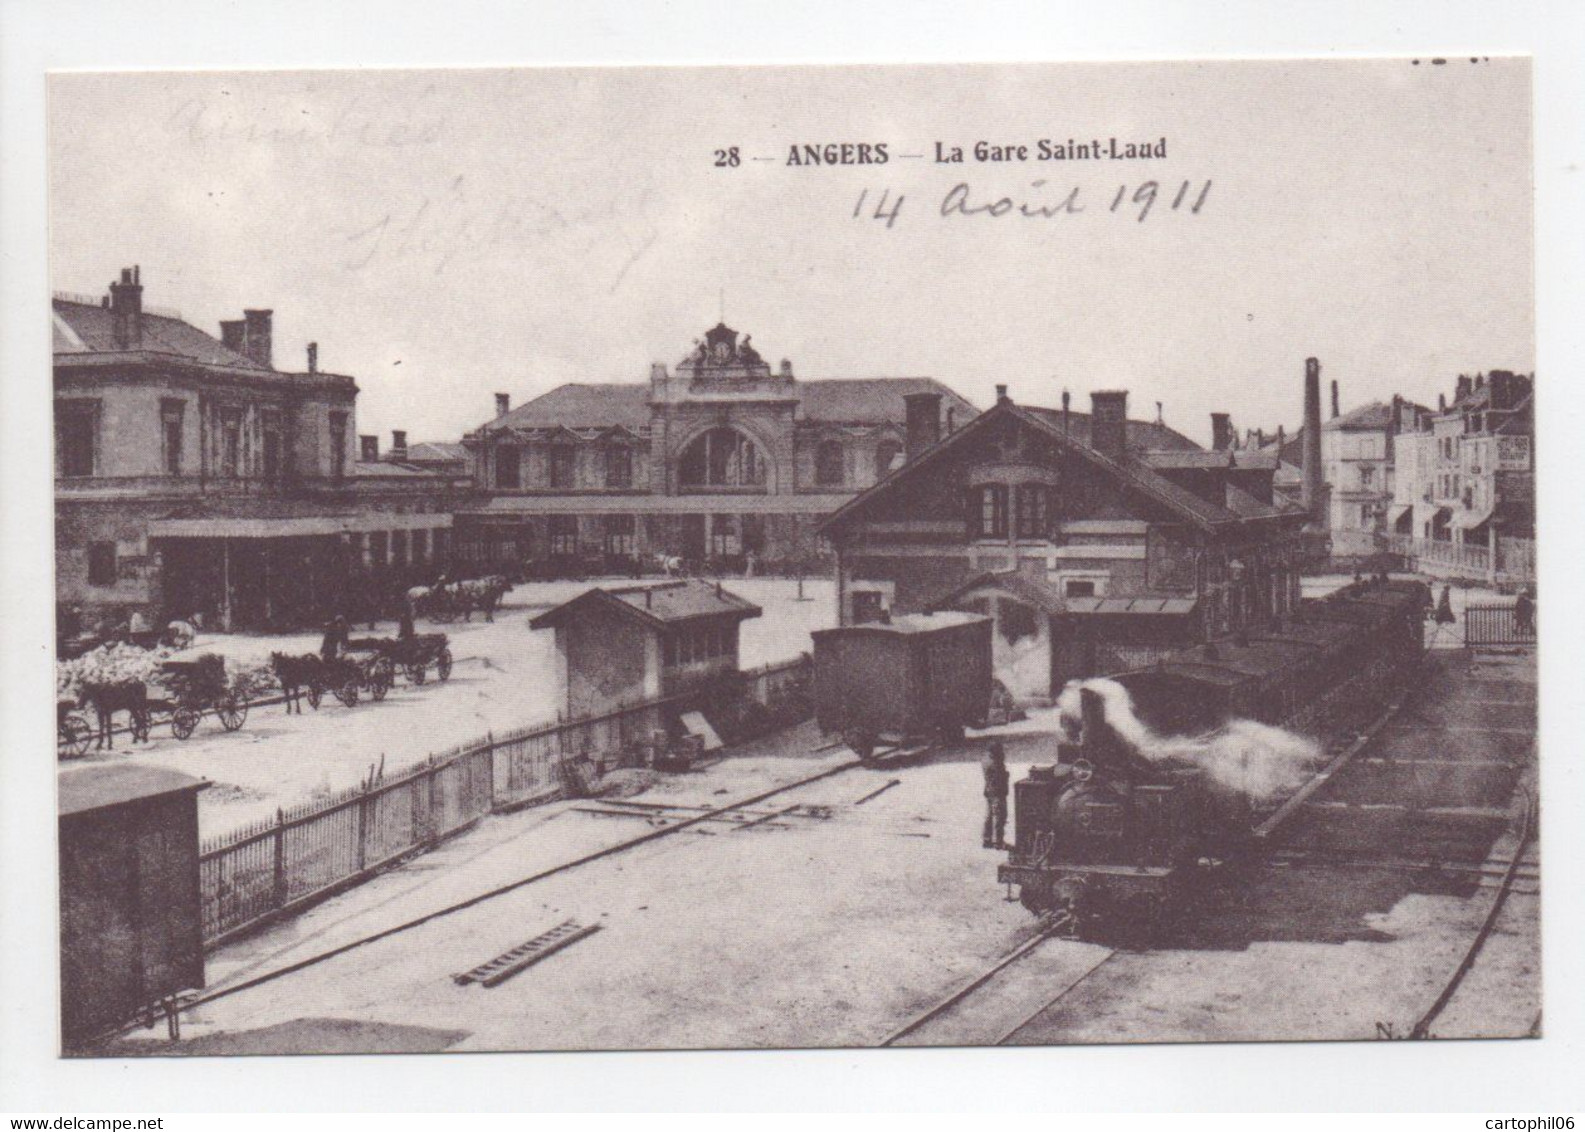 - REPRODUCTION CPA ANGERS (49) - Gare D'Angers-Anjou, 1909 - Ancienne Gare D'Angers St-Laud - Locomotive SACM - - Angers